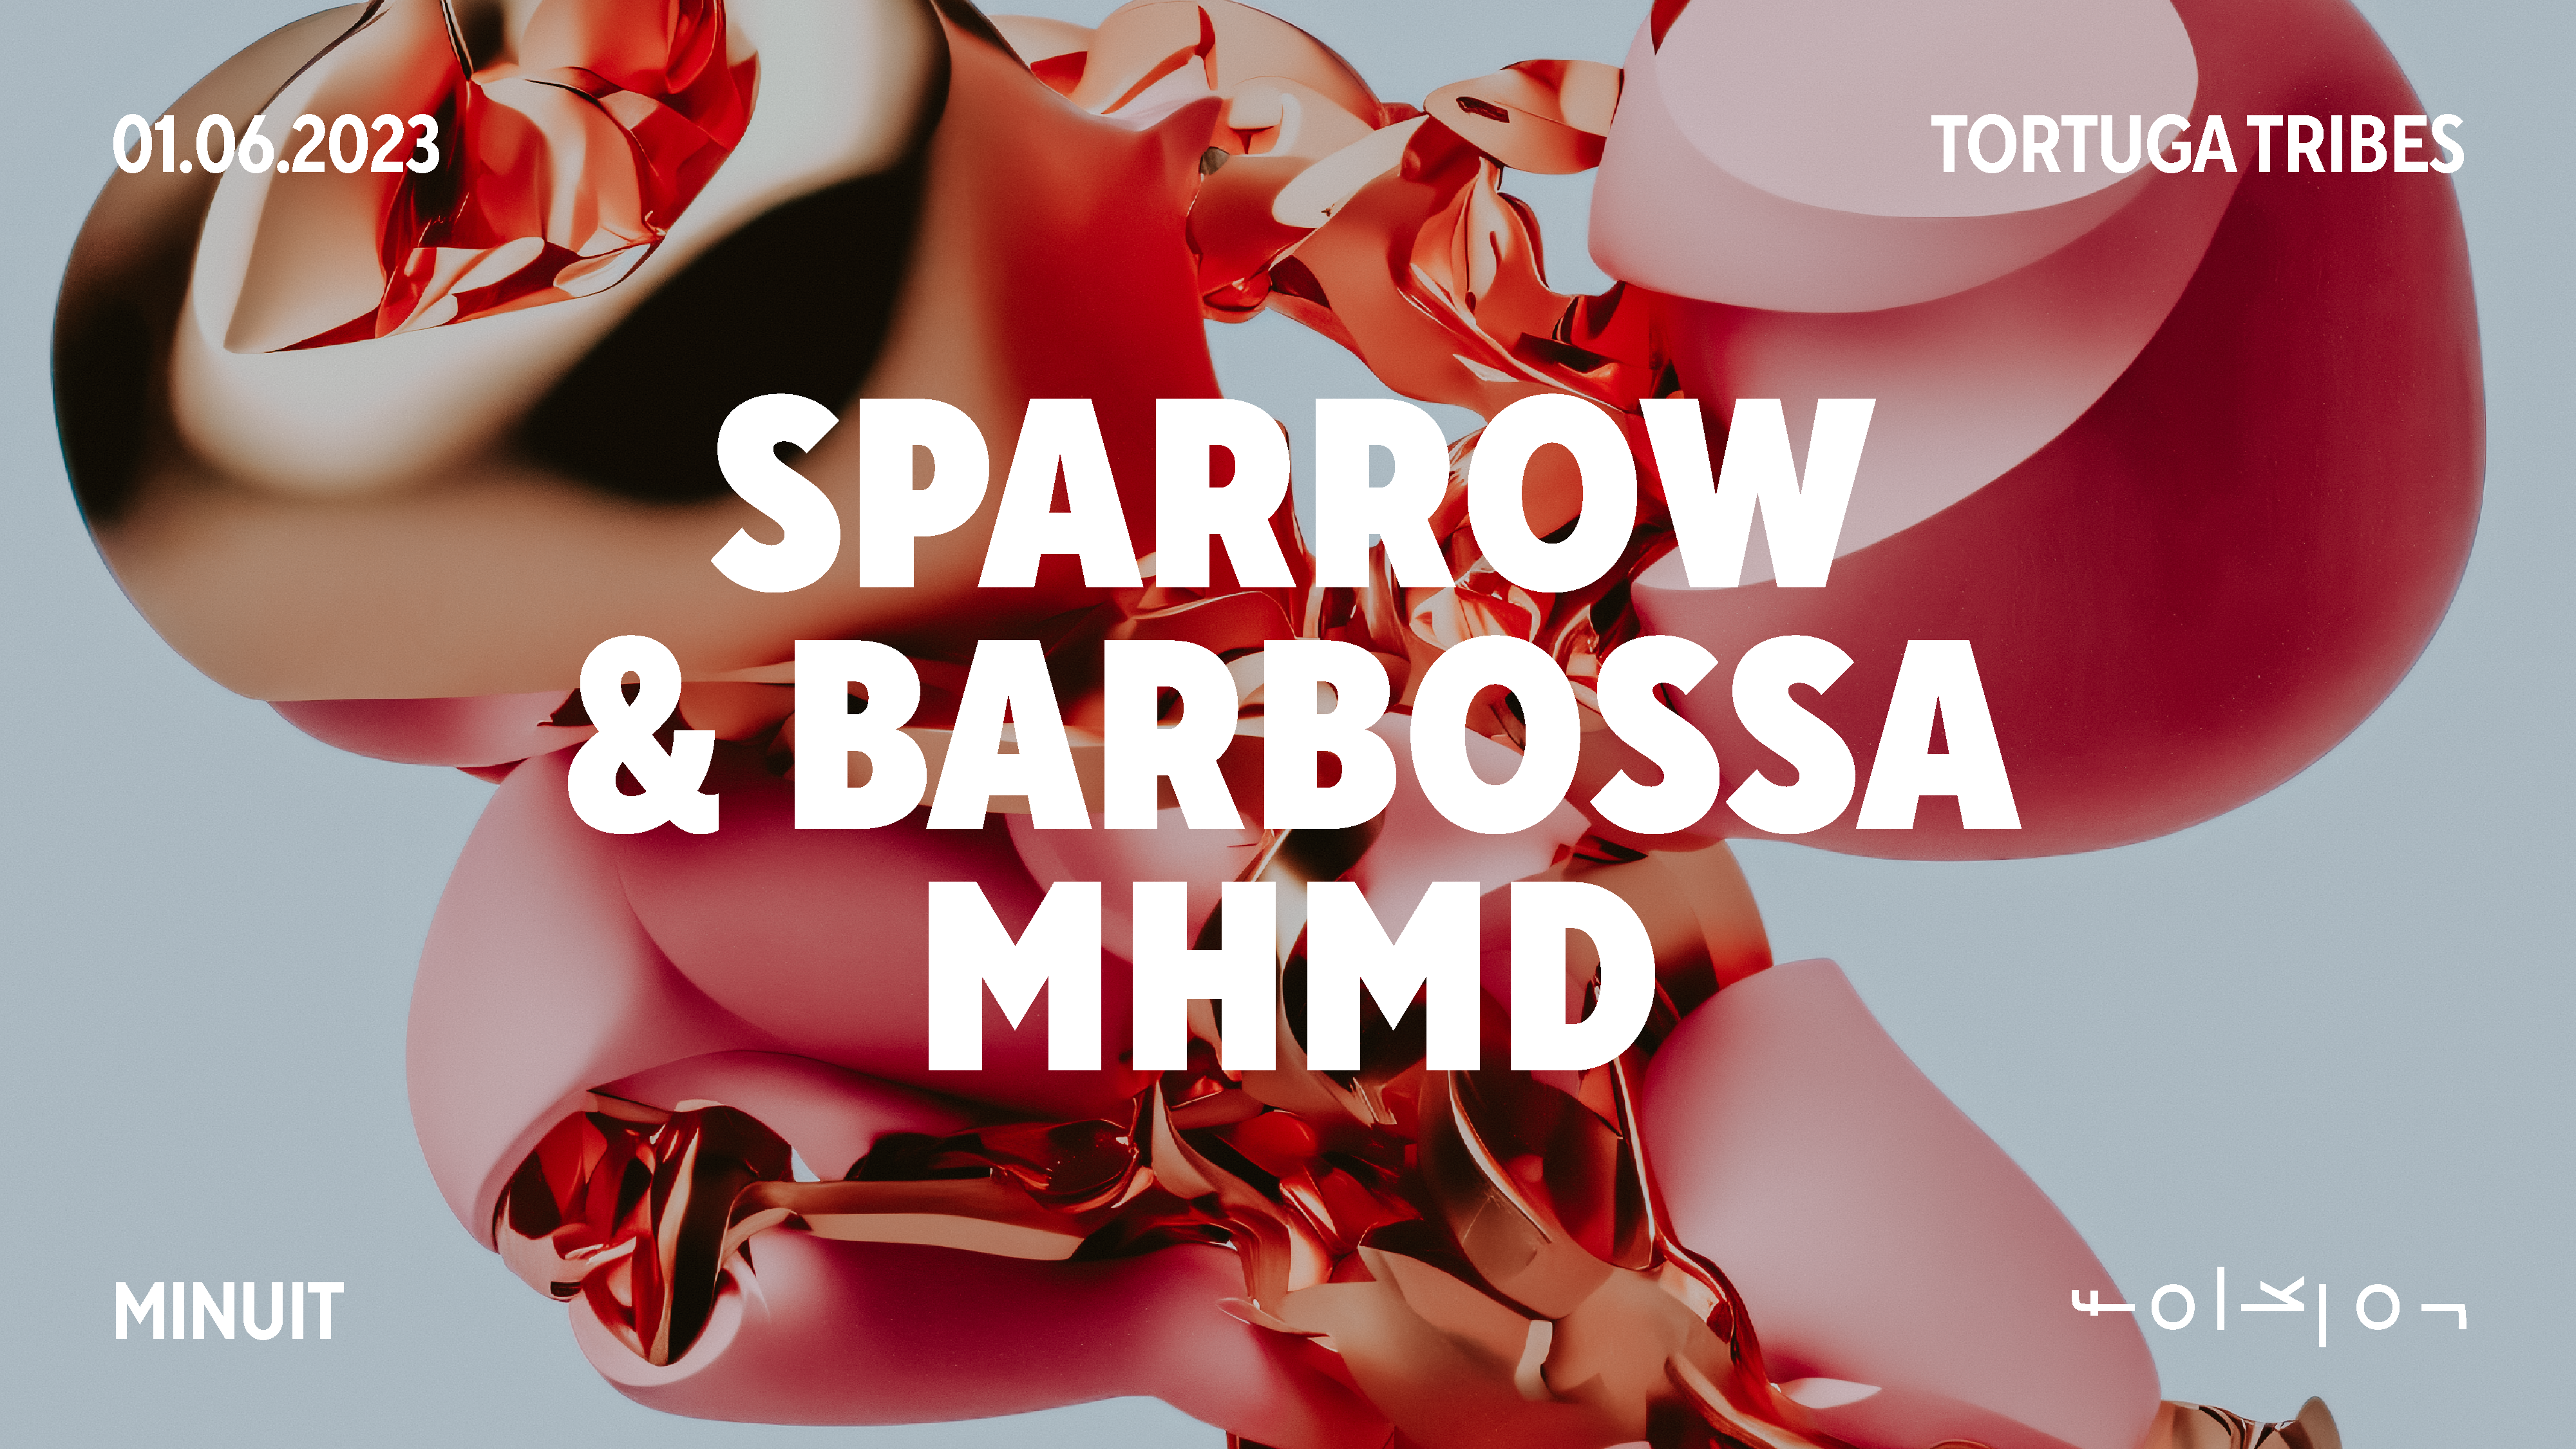 Tortuga Tribes /// Sparrow & Barbossa - MHMD - フライヤー表